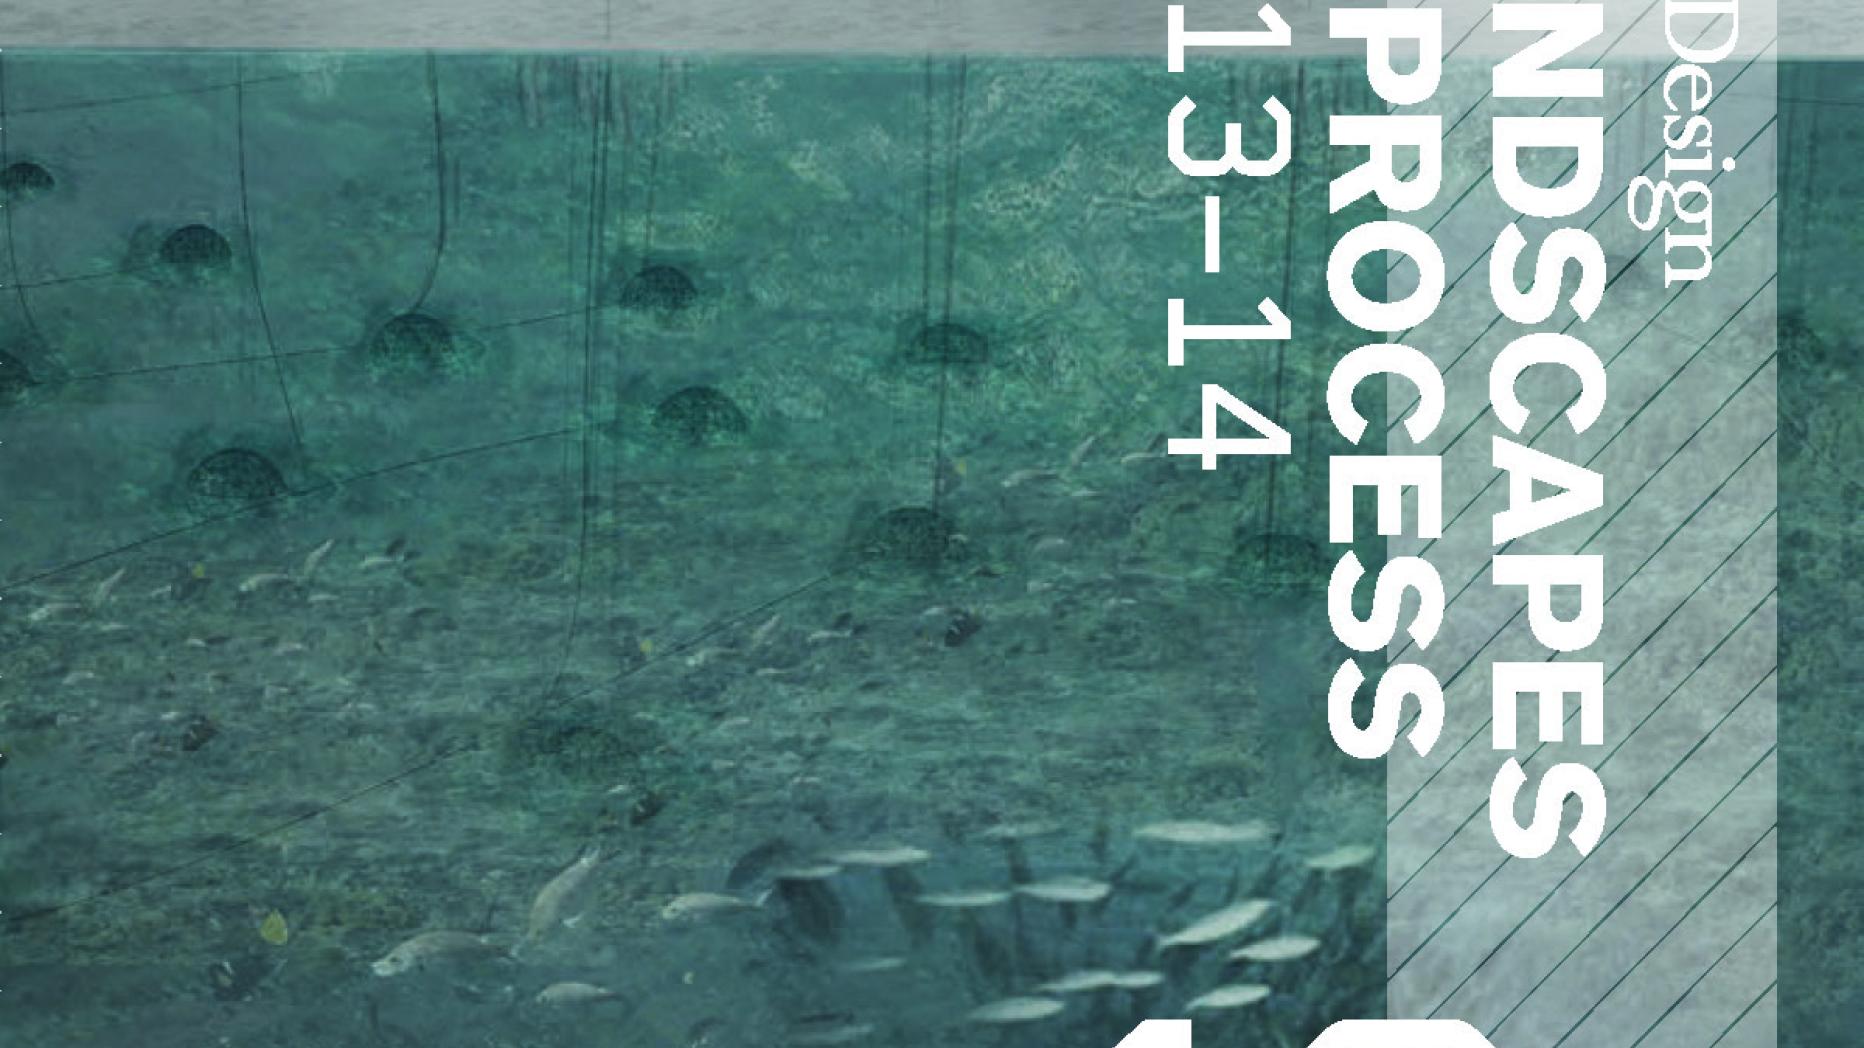 Cover for publication, "Landscapes in Process" edition 18, 2013-14